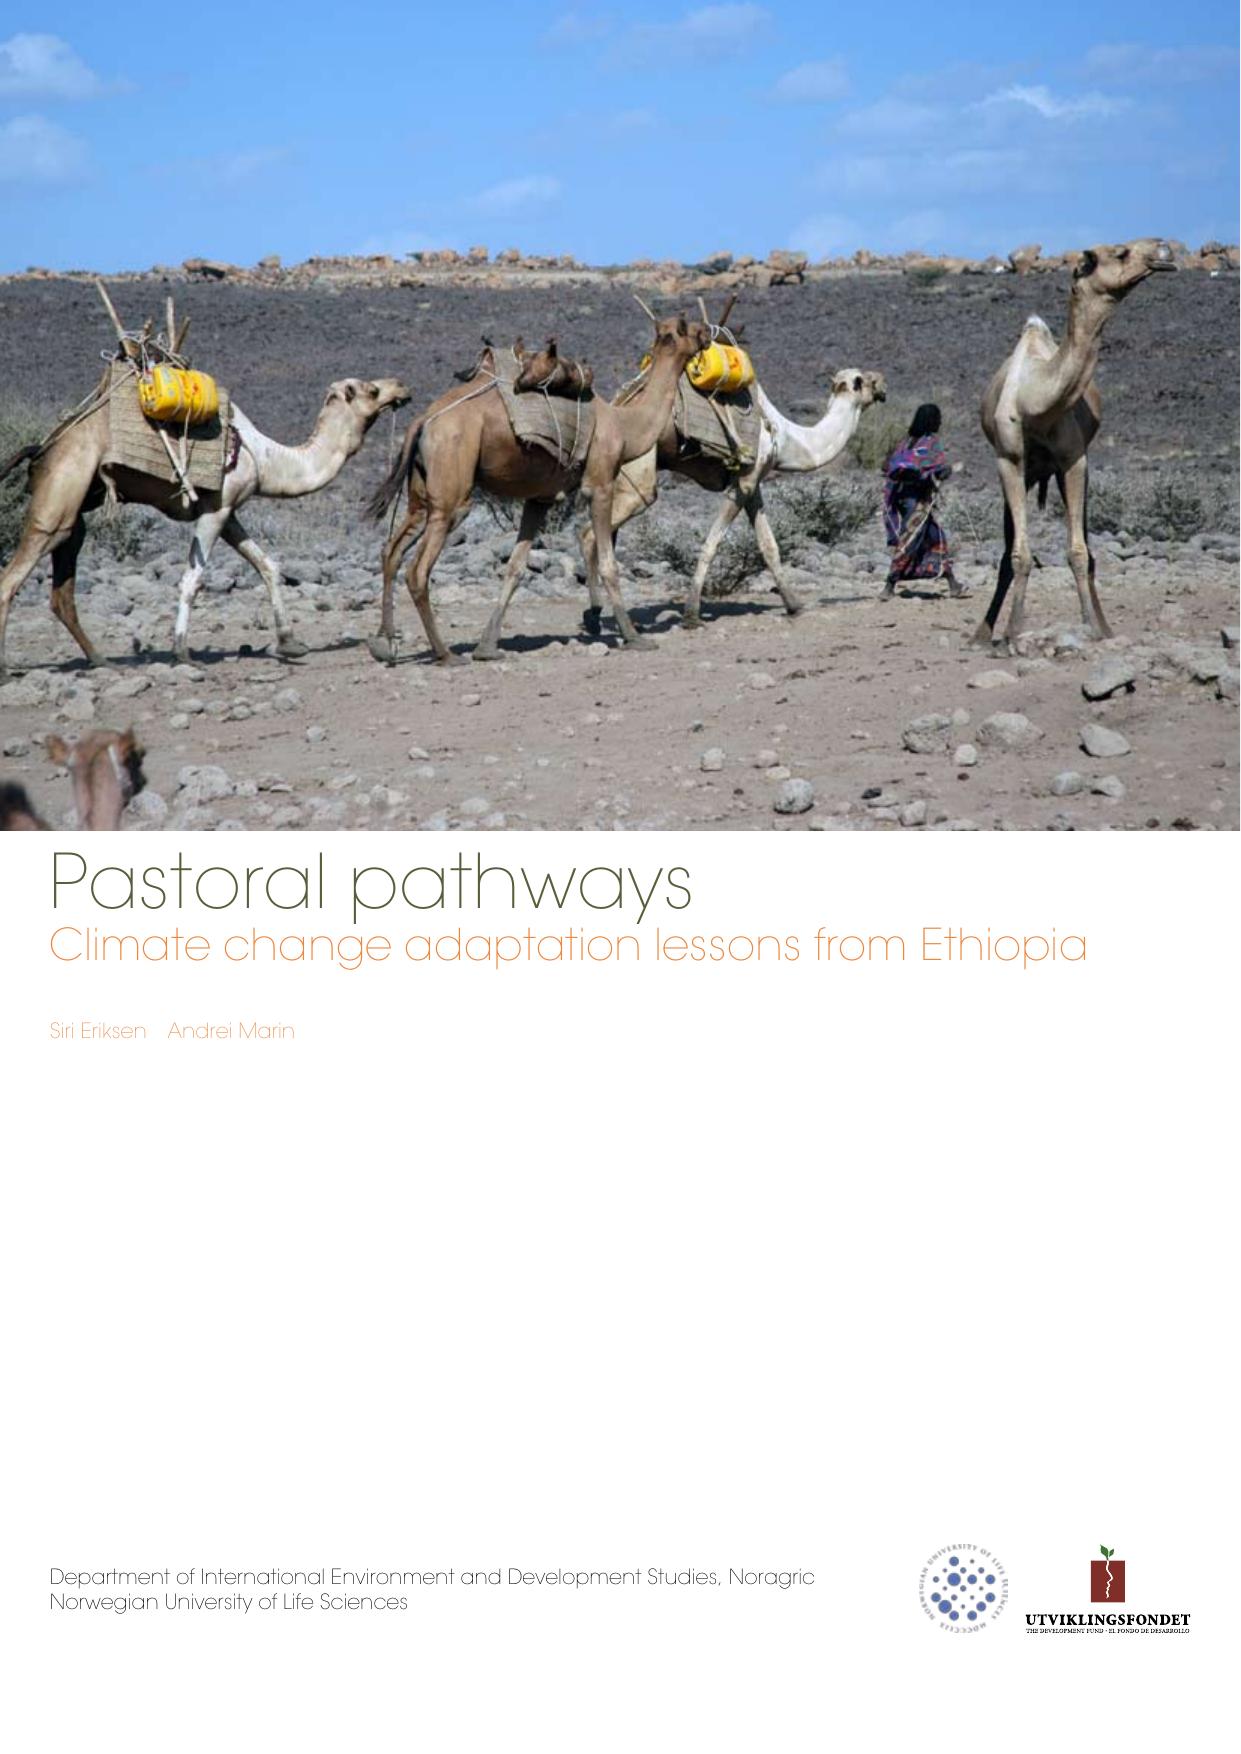 Pastoral pathways and climate change. 2011